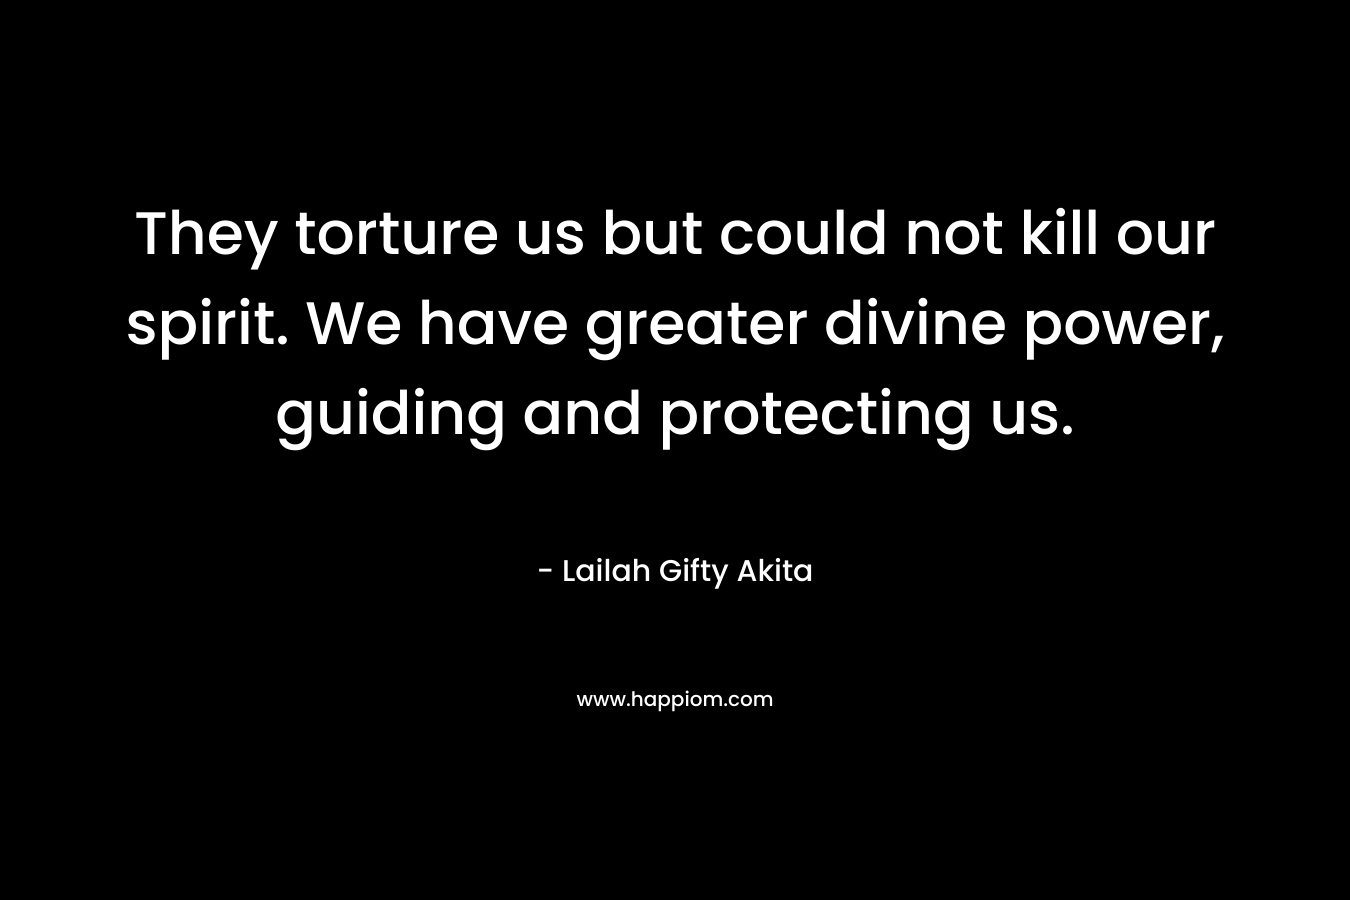 They torture us but could not kill our spirit. We have greater divine power, guiding and protecting us. – Lailah Gifty Akita